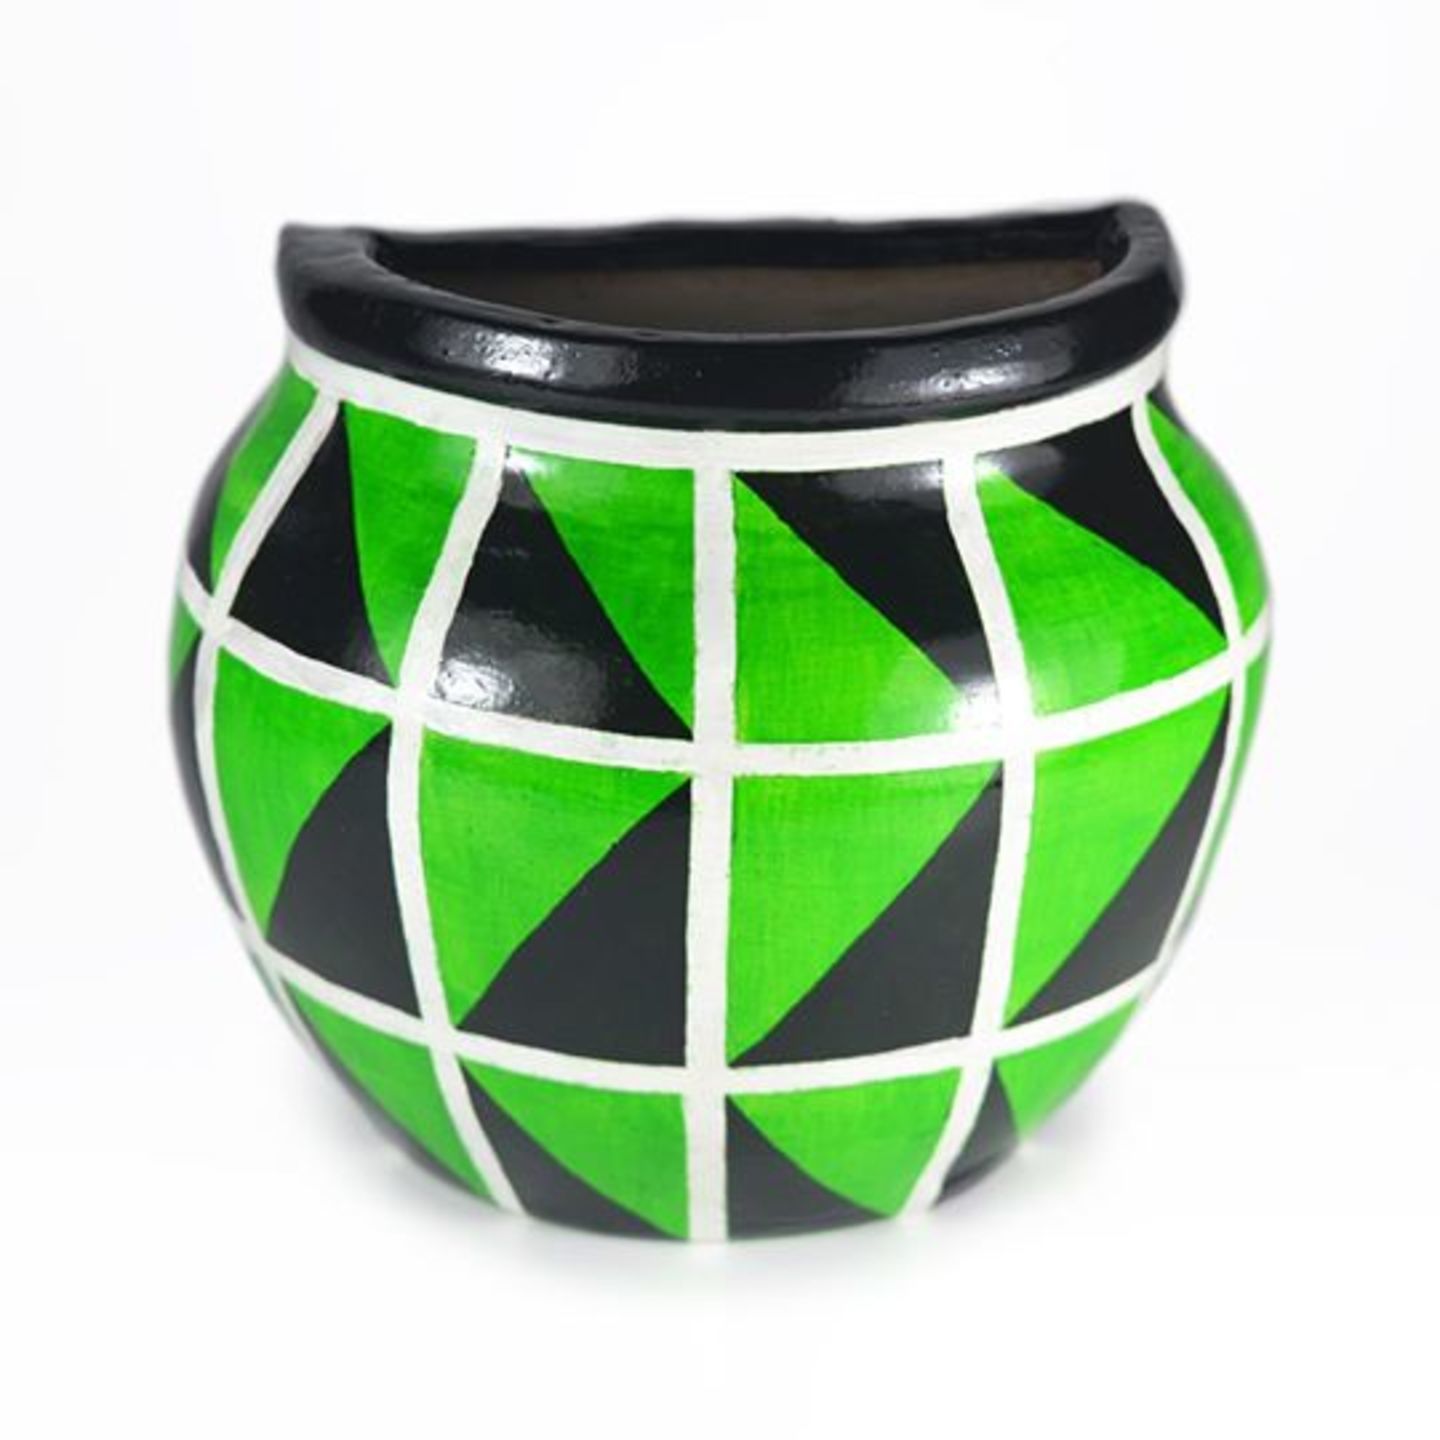 Half earthern pot with green and black coloured